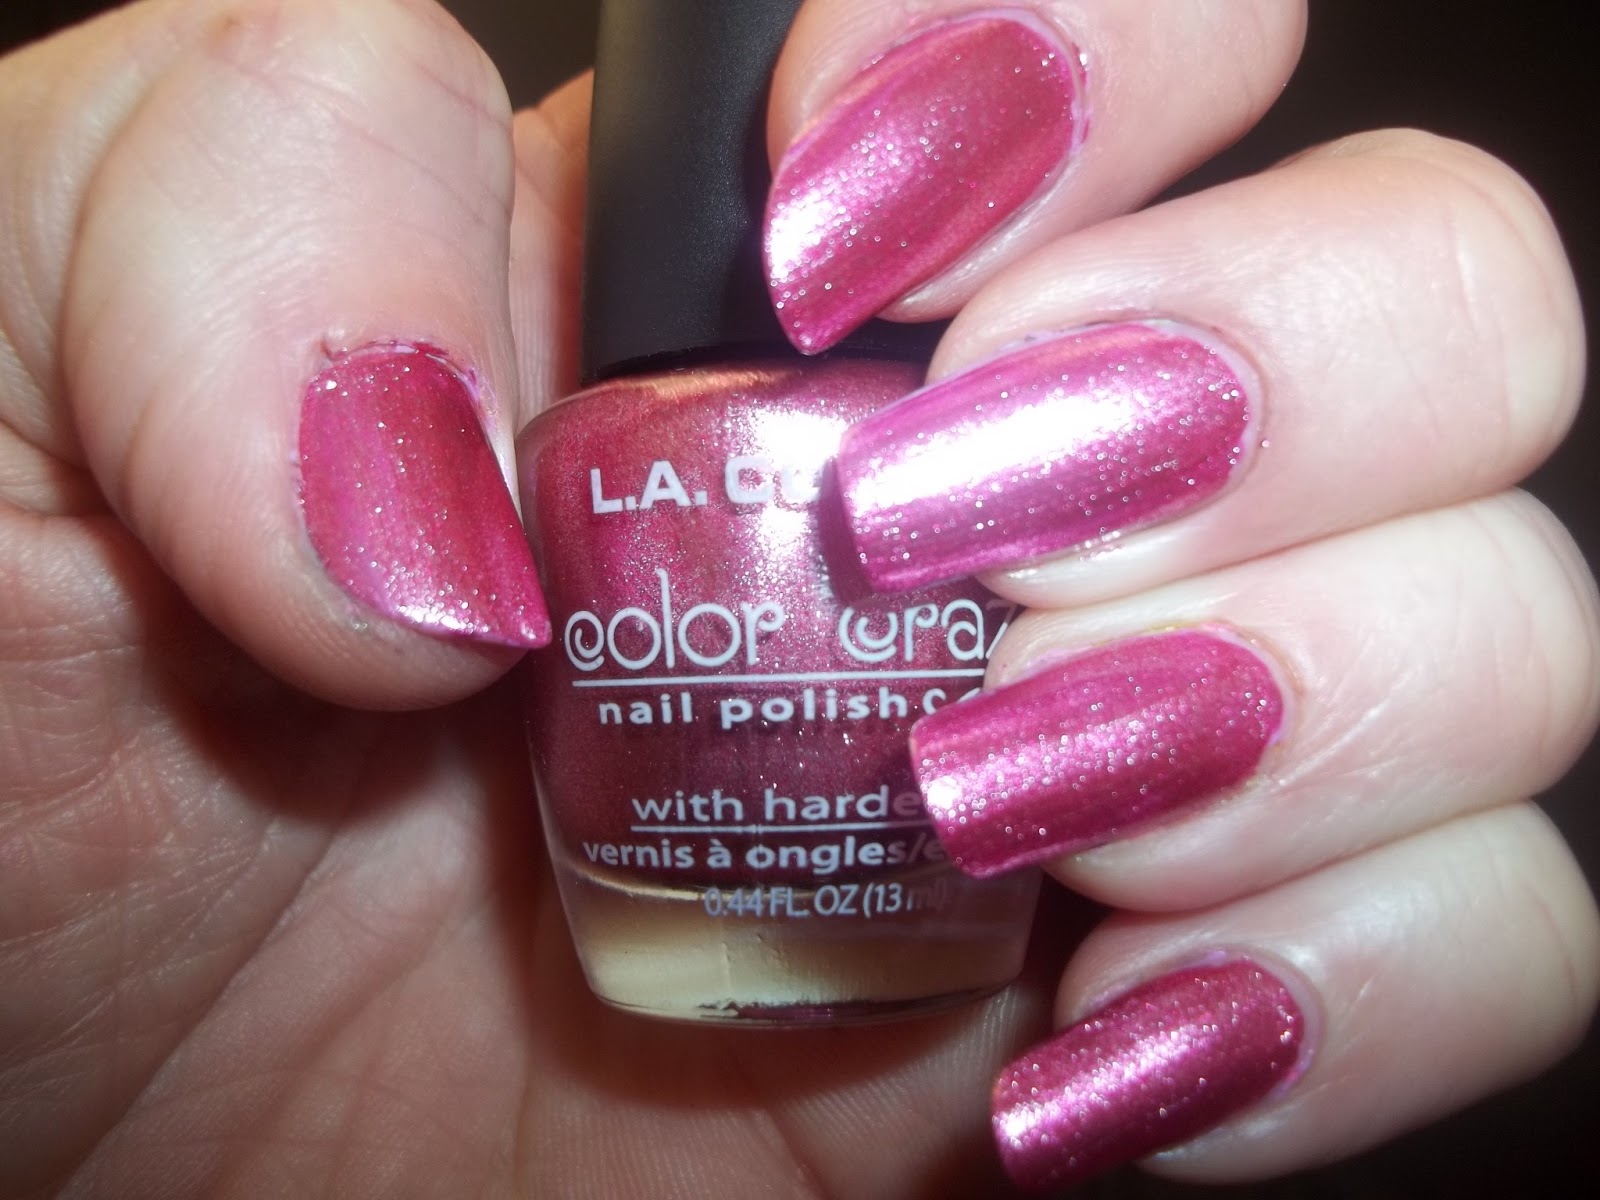 1. L.A. Colors Color Craze Nail Polish with Hardener - wide 3